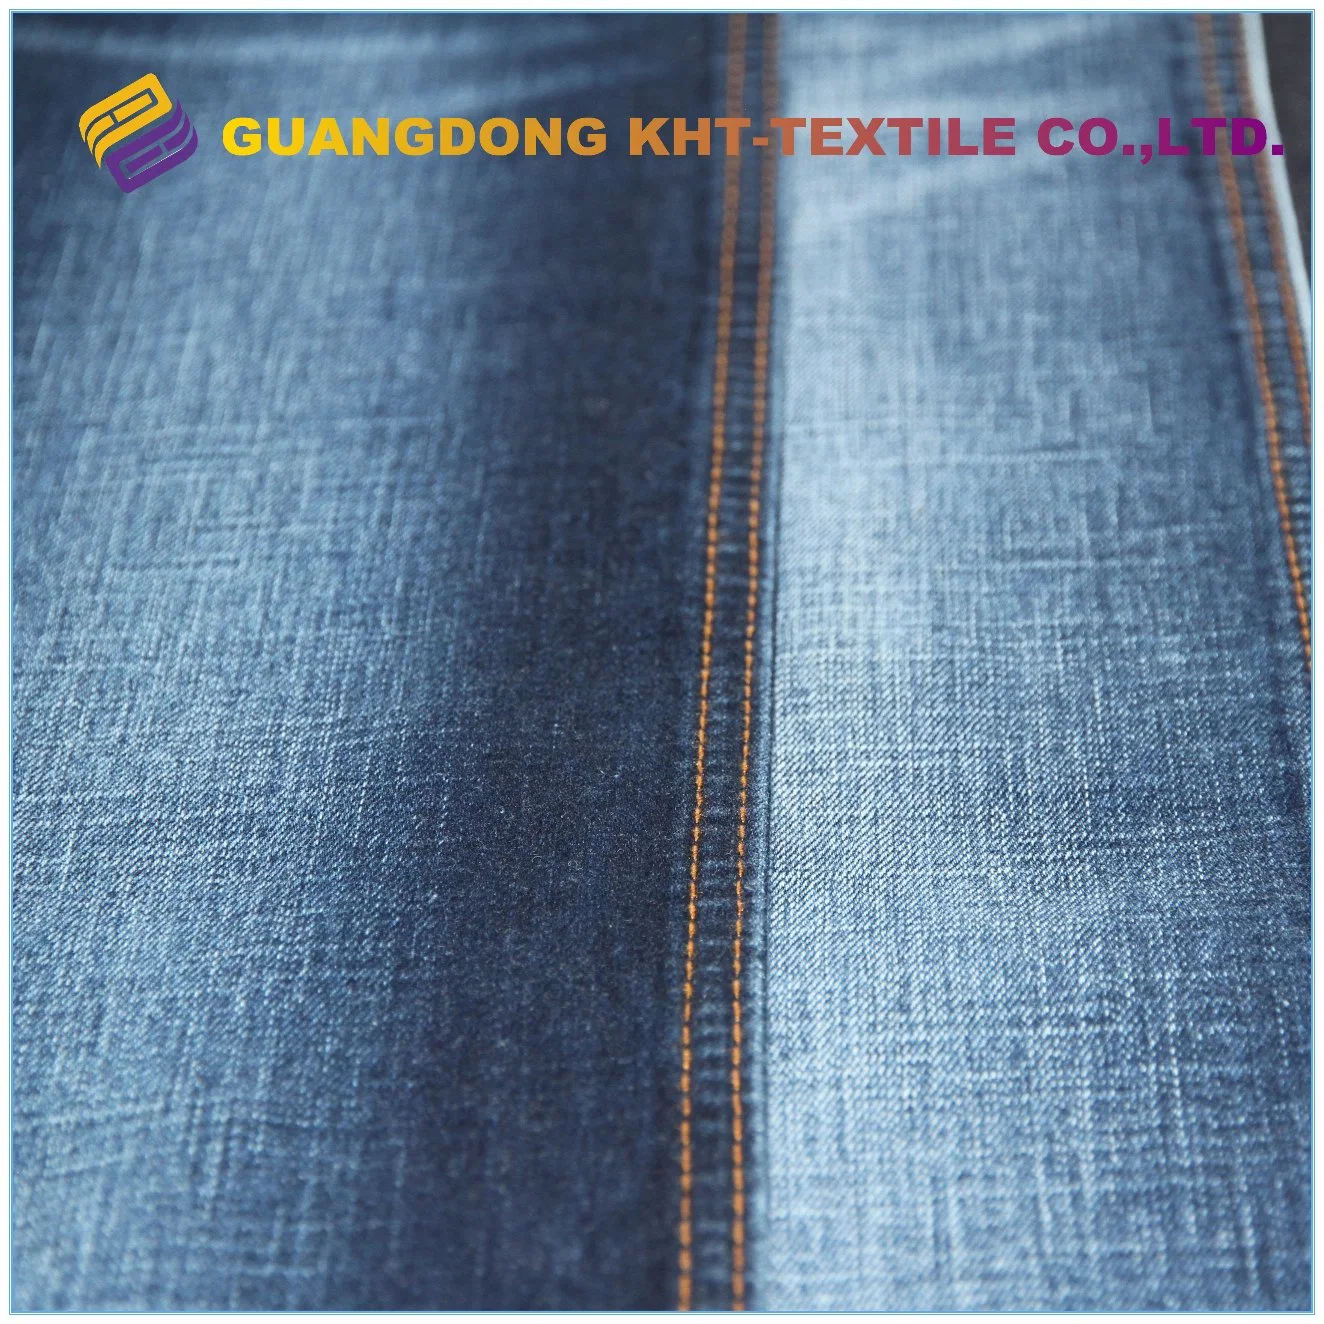 9.1oz Cotton Polyester Spandex Twill Dobby Denim Fabric for Coat Jeans Handcraft